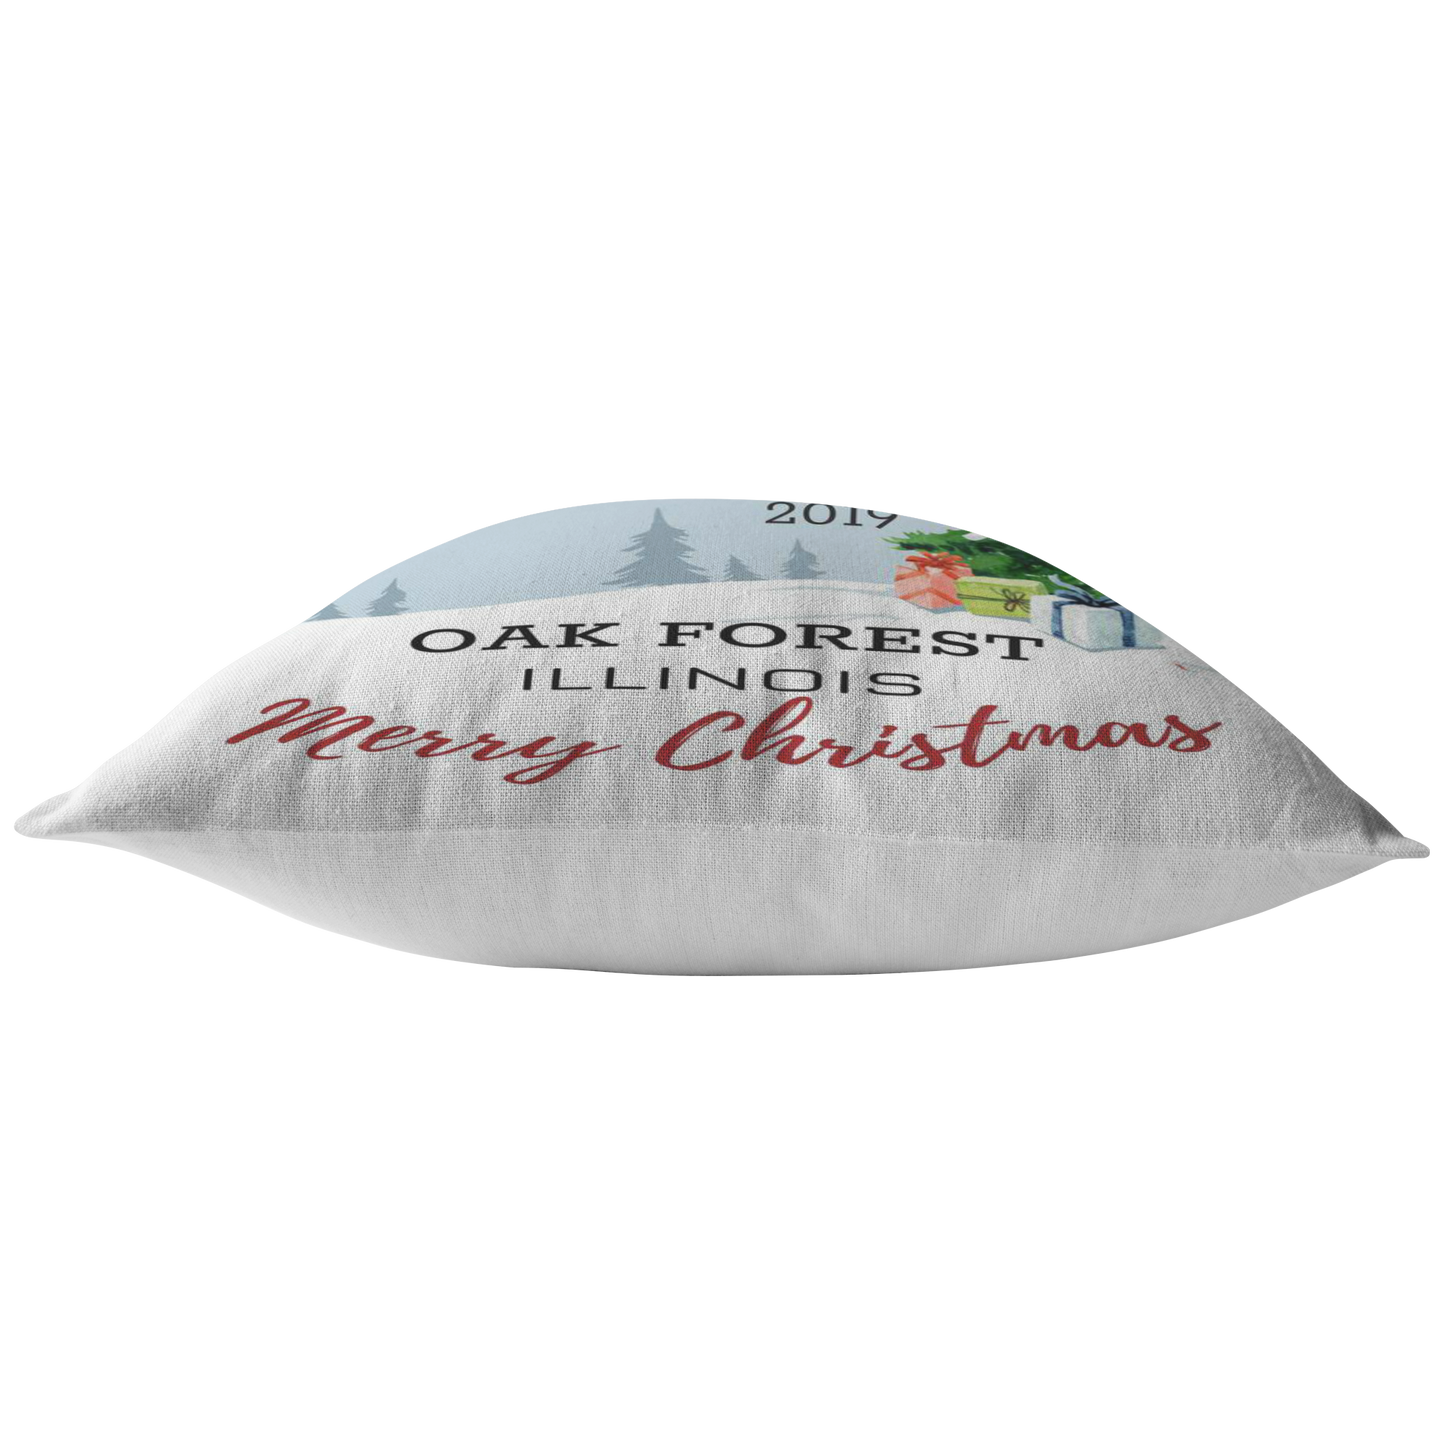 ND-pl20798513-sp-30322 - [ Oak Forest | Illinois | 1 ] (PI_ThrowPillowCovers) Merry Christmas Pillow Covers 18x18 - Home Sweet Home Oak Fo